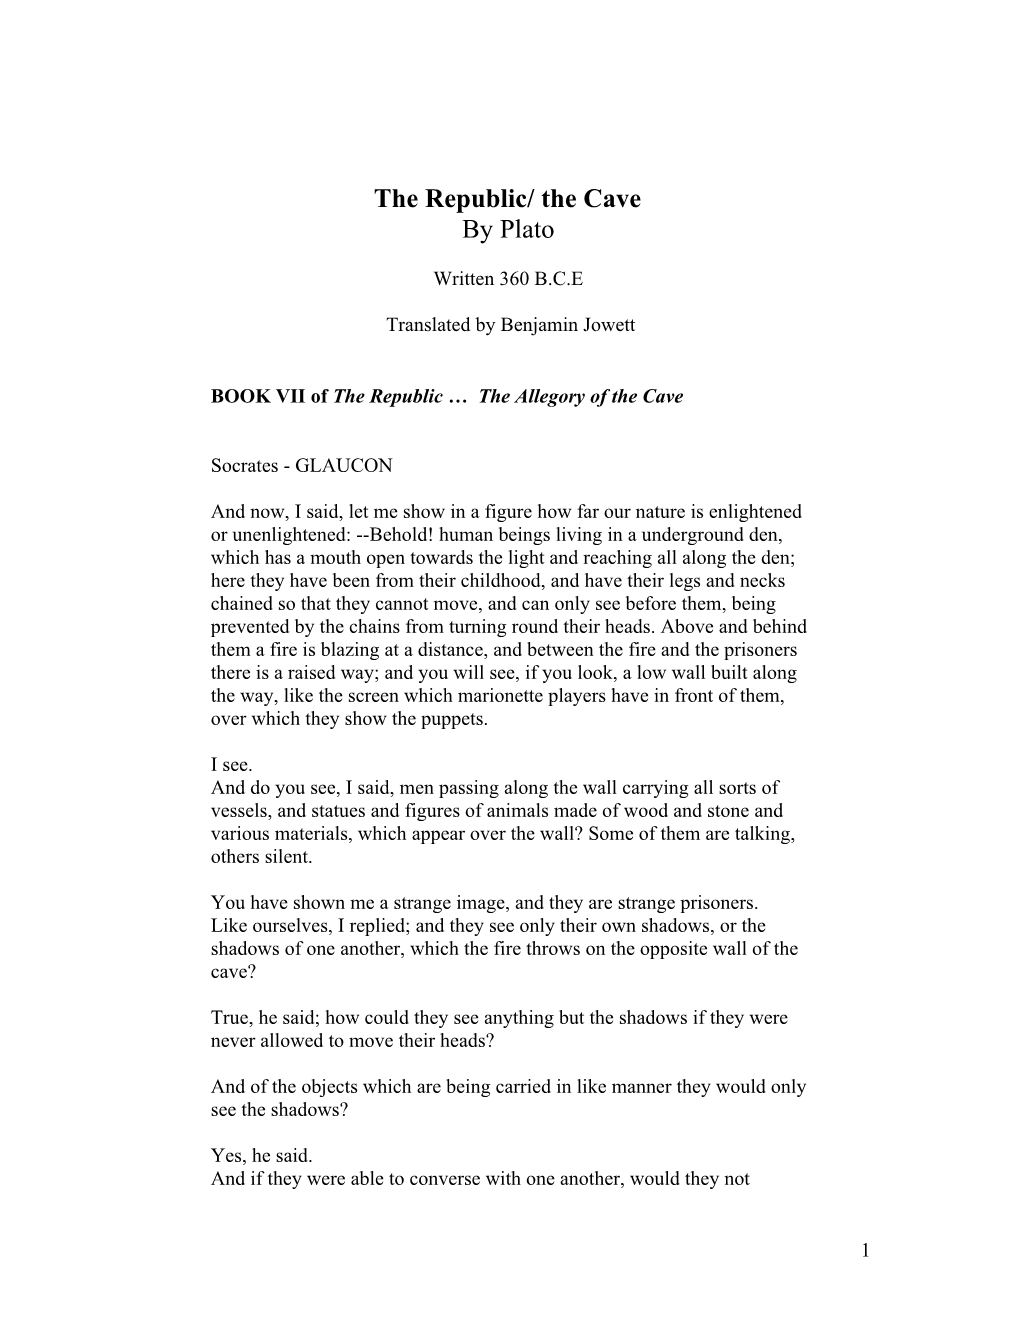 BOOK VII of the Republic the Allegory of the Cave